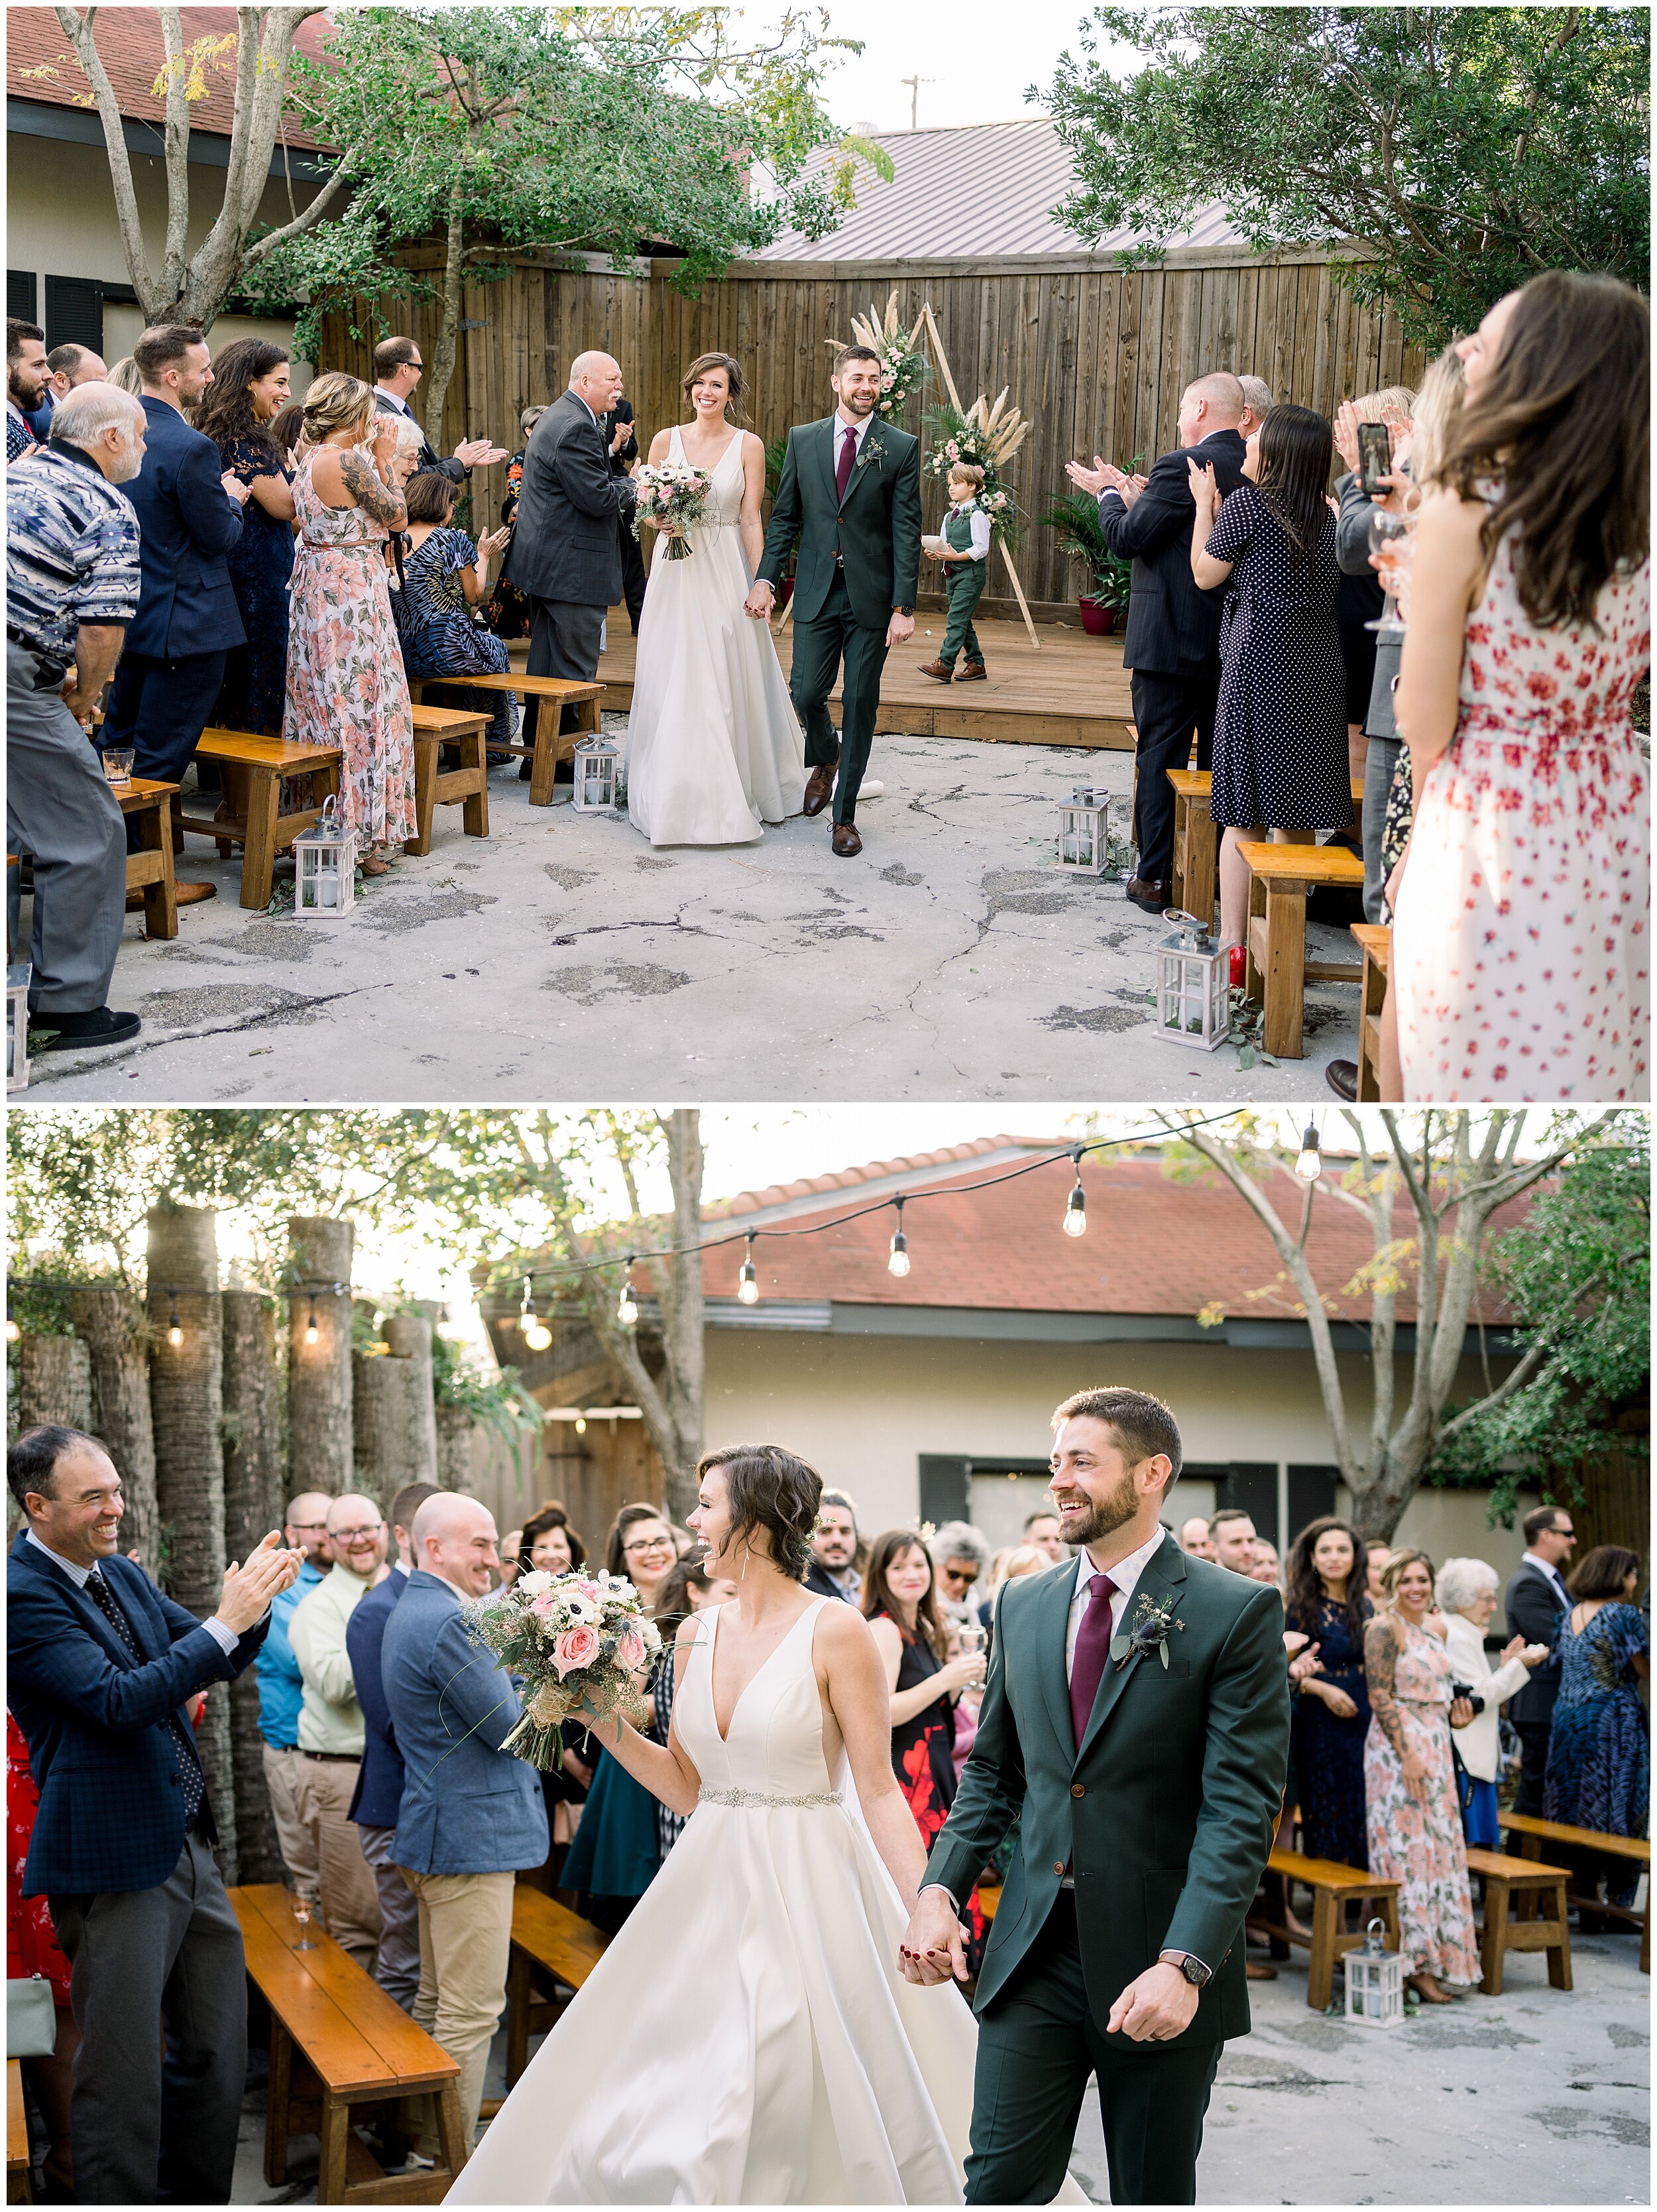 Intimate backyard garden family wedding At carriage house in St. Augustine Florida